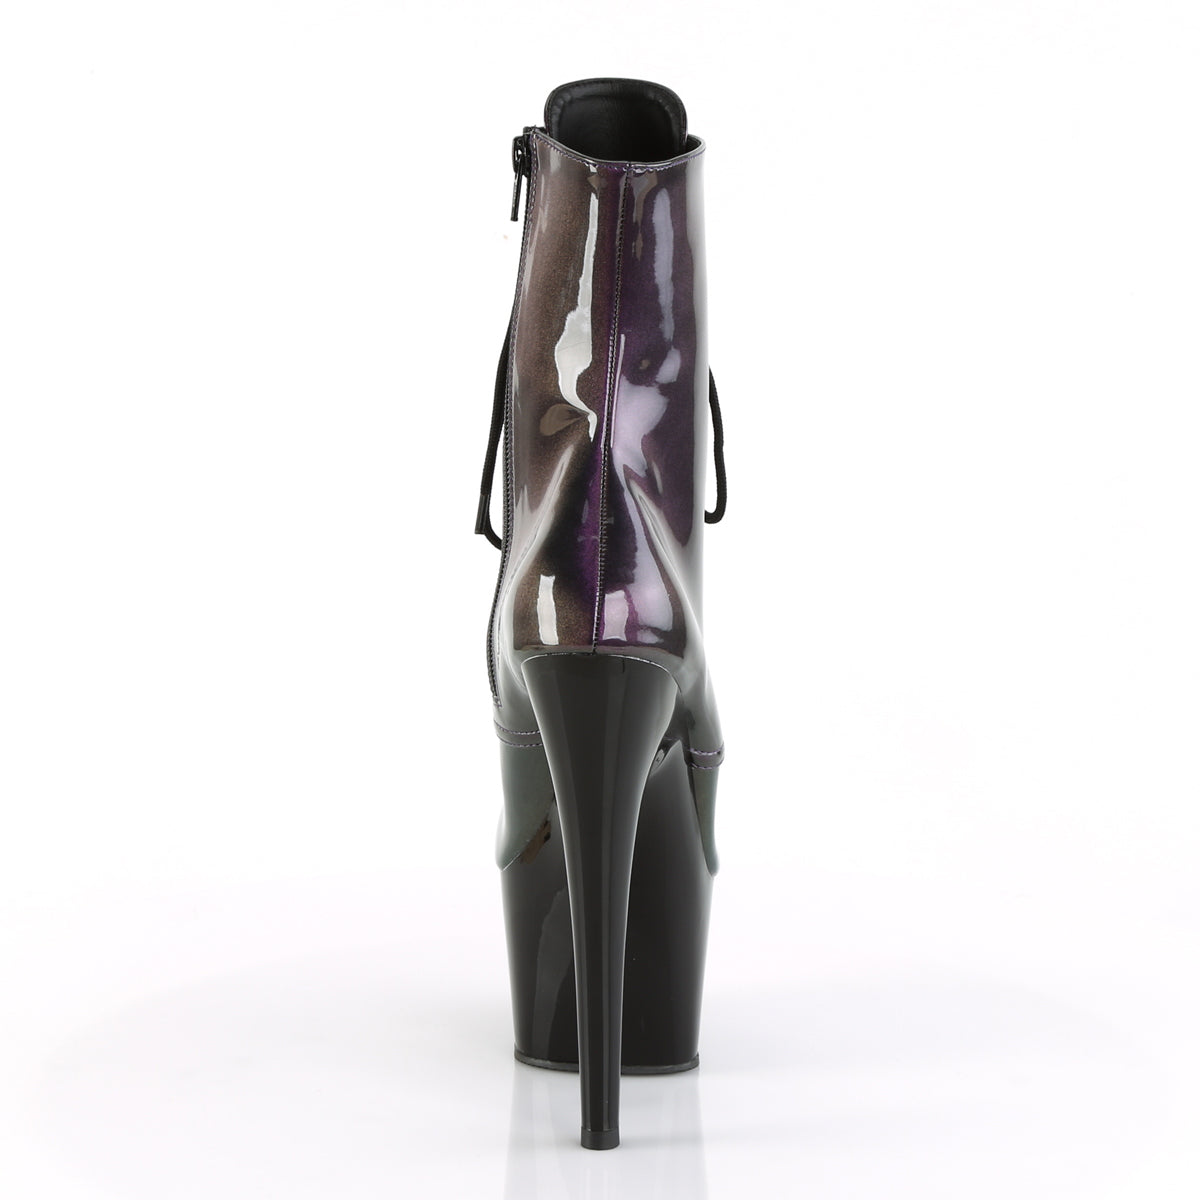 ADORE-1020SHG 7" Heel Purple Pole Dancing Ankle Boots-Pleaser- Sexy Shoes Fetish Footwear